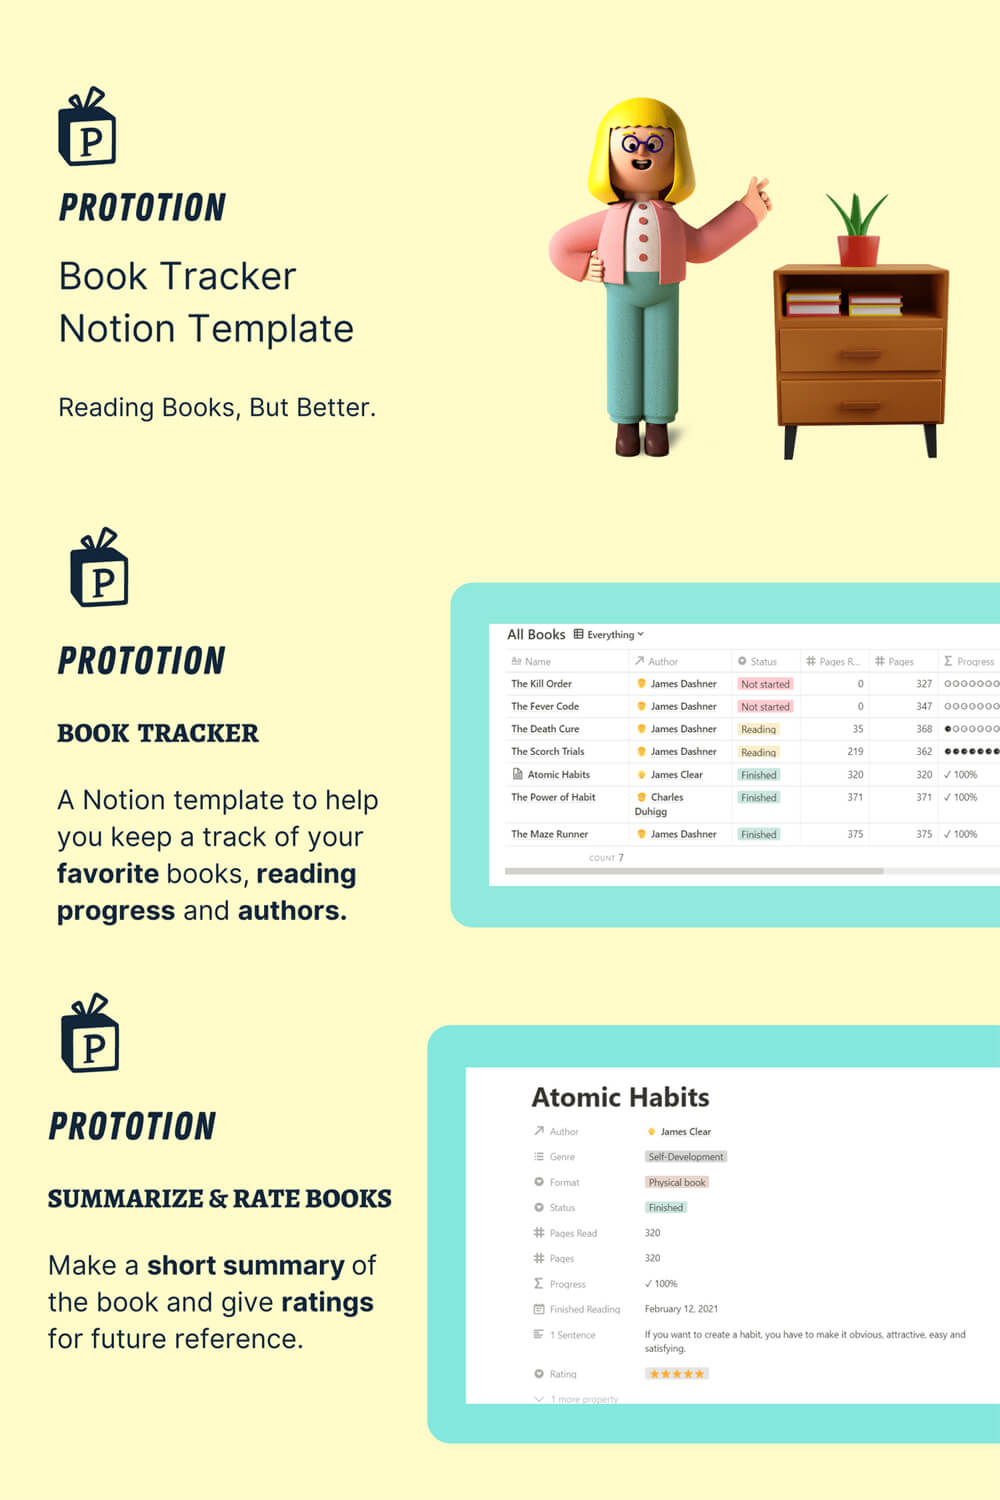 Atomic habits of book tracker.